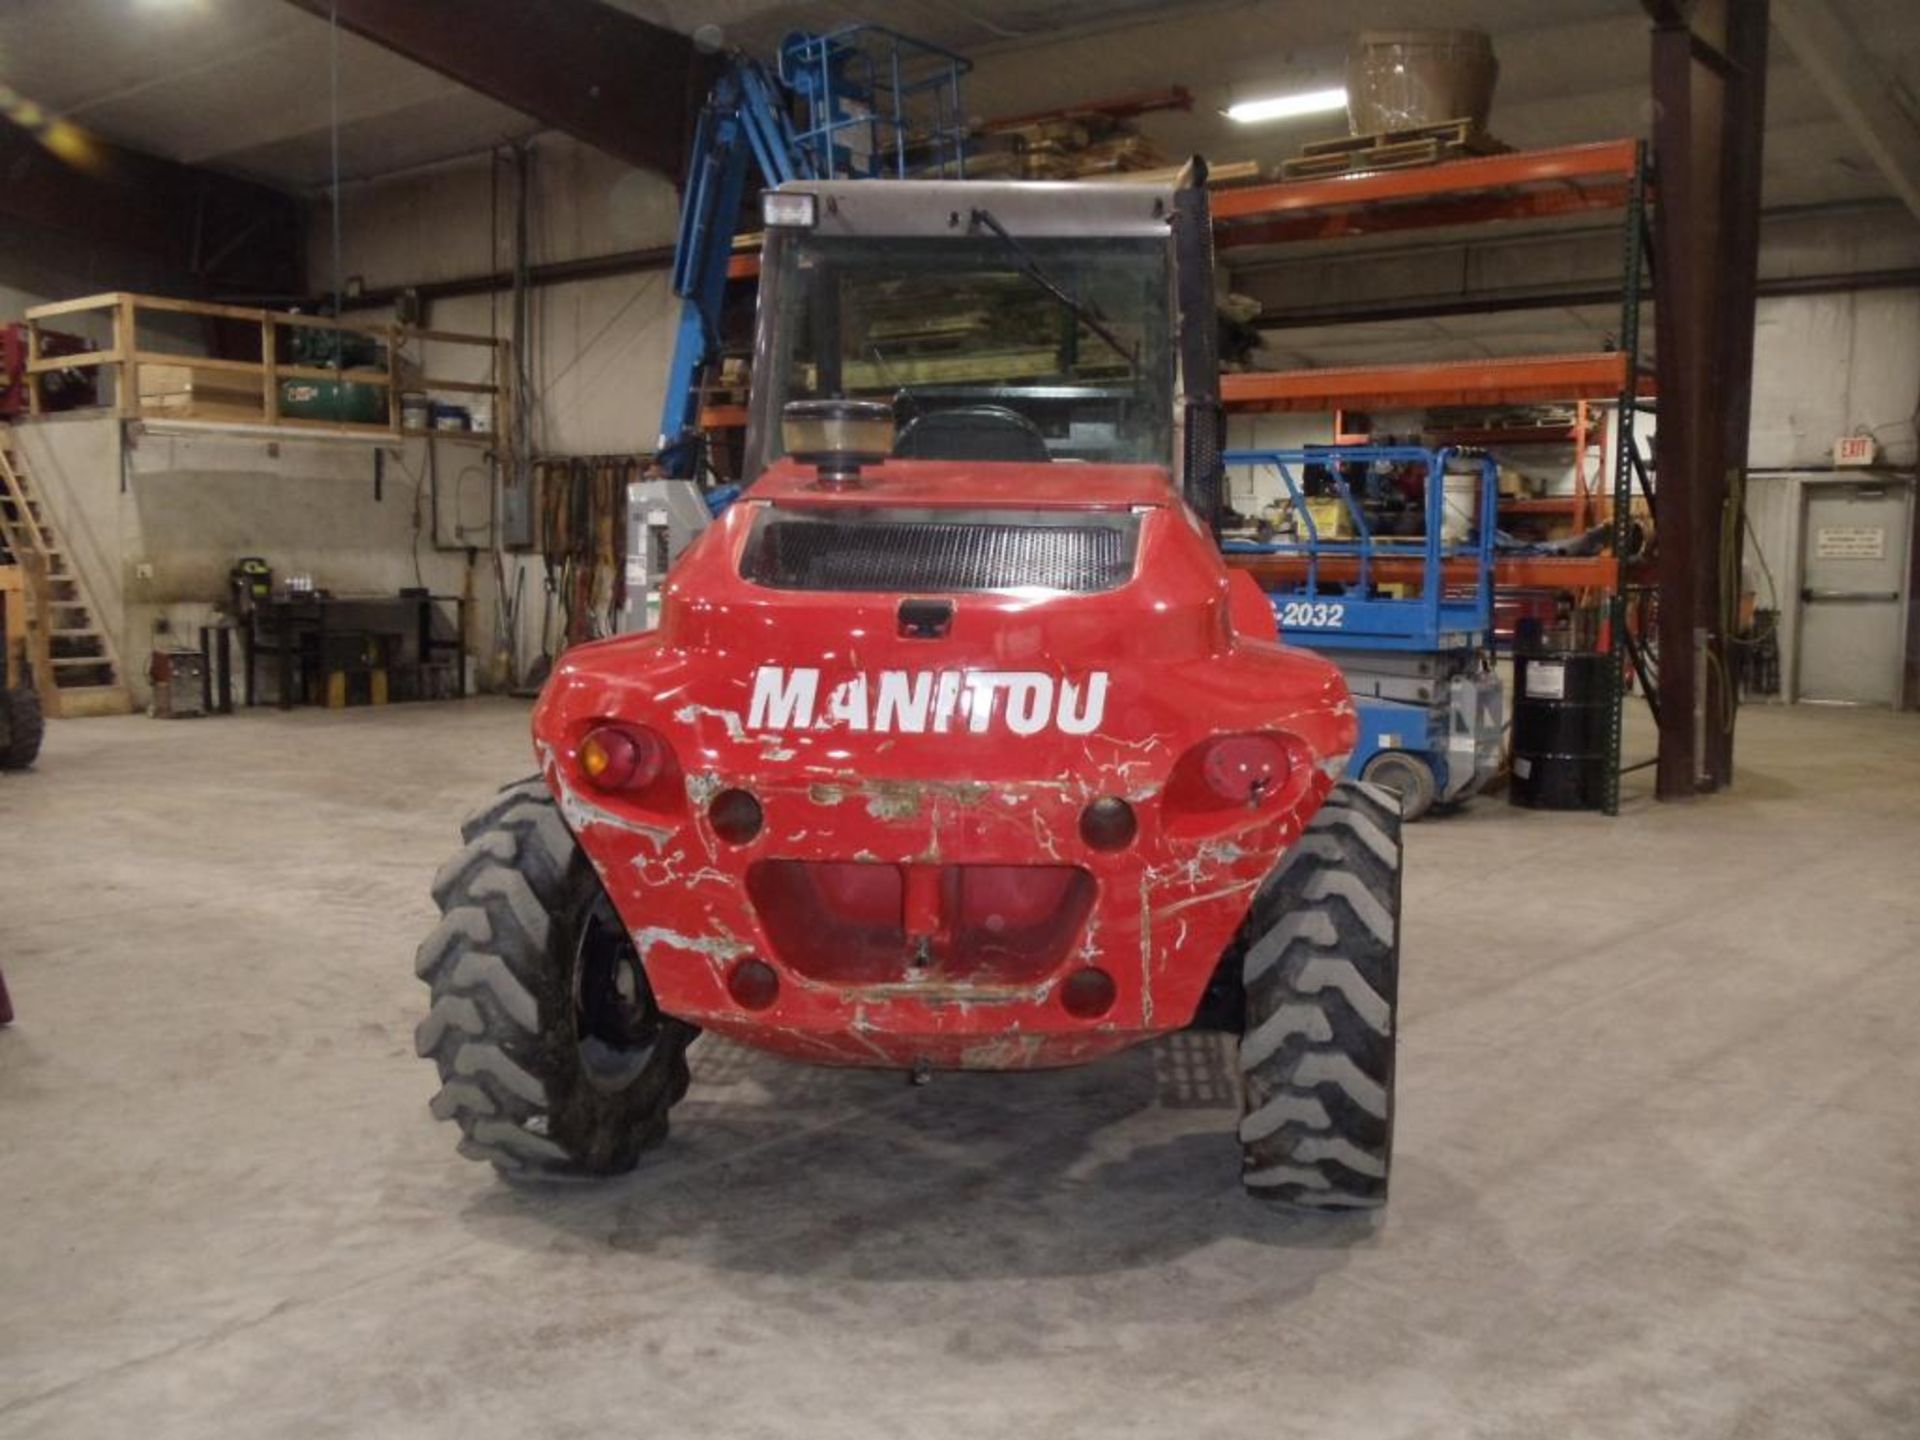 Manitou Rough Terrain Forklift - Image 7 of 9